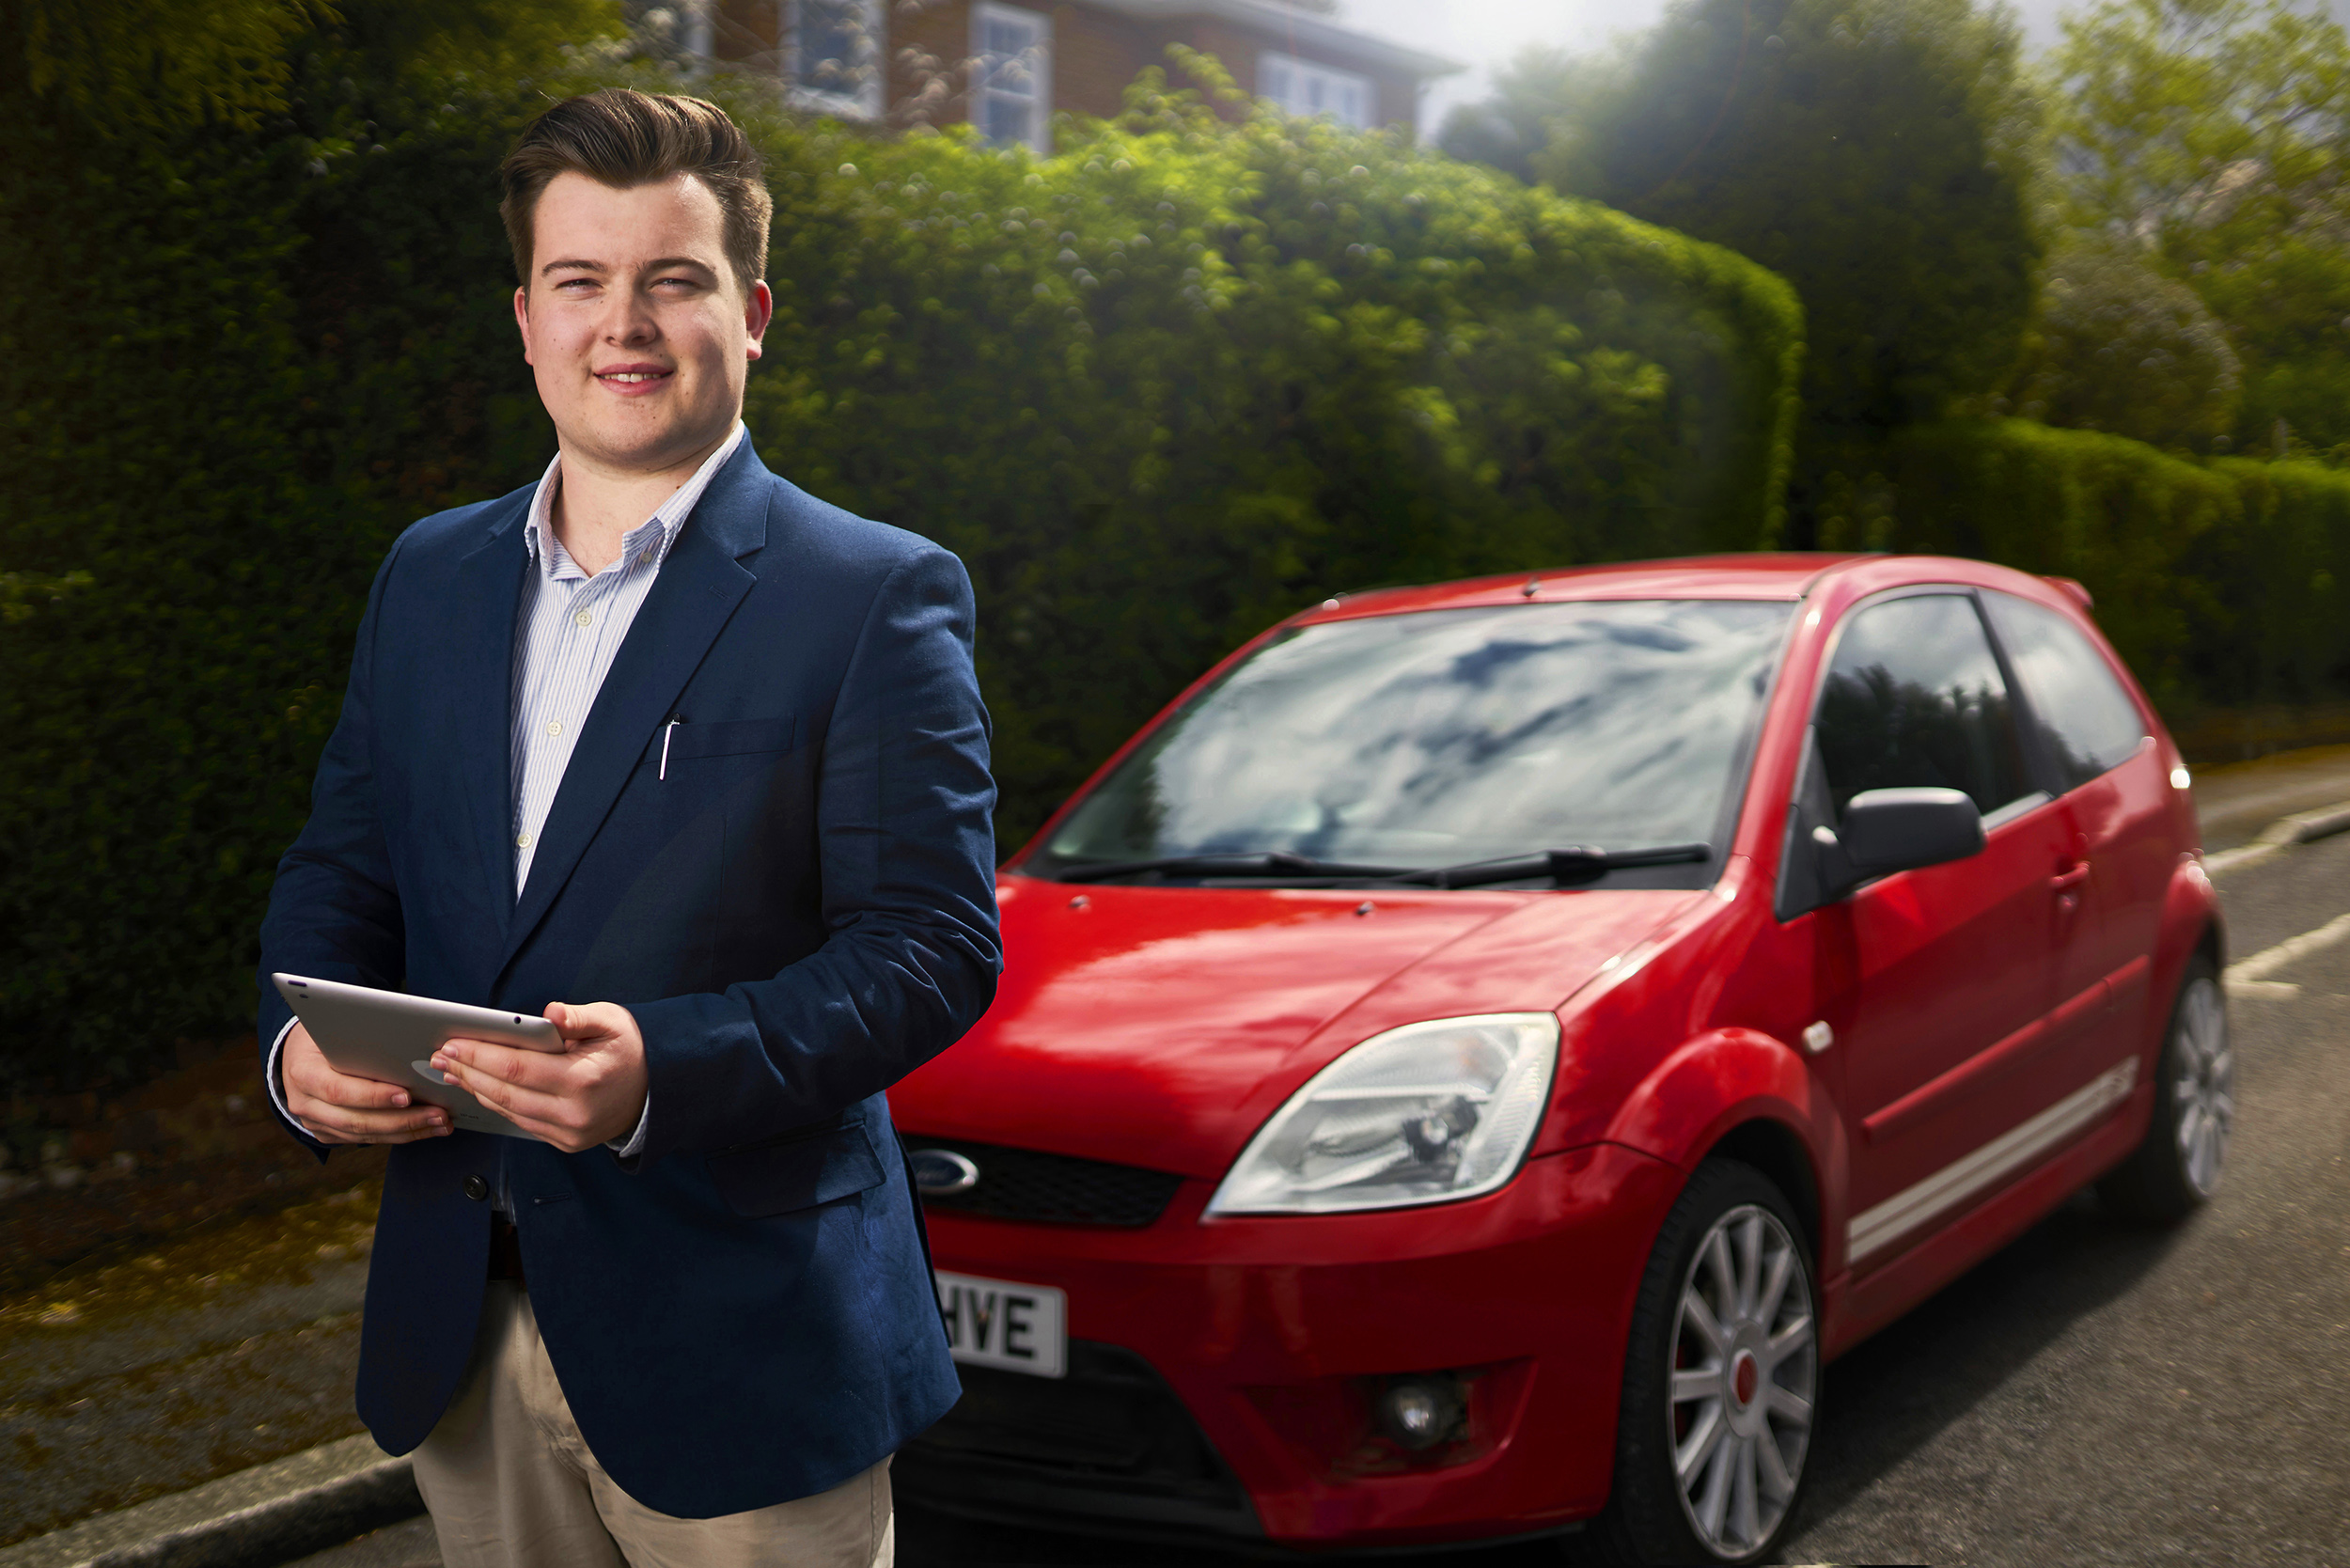 George Howell, founder of Ideal First Car, photographed in Exeter, Devon, 26 April 2018. Photo by Bristol photographer Adam Gasson / adamgasson.com Edit Note: Pre-saturated final high res image